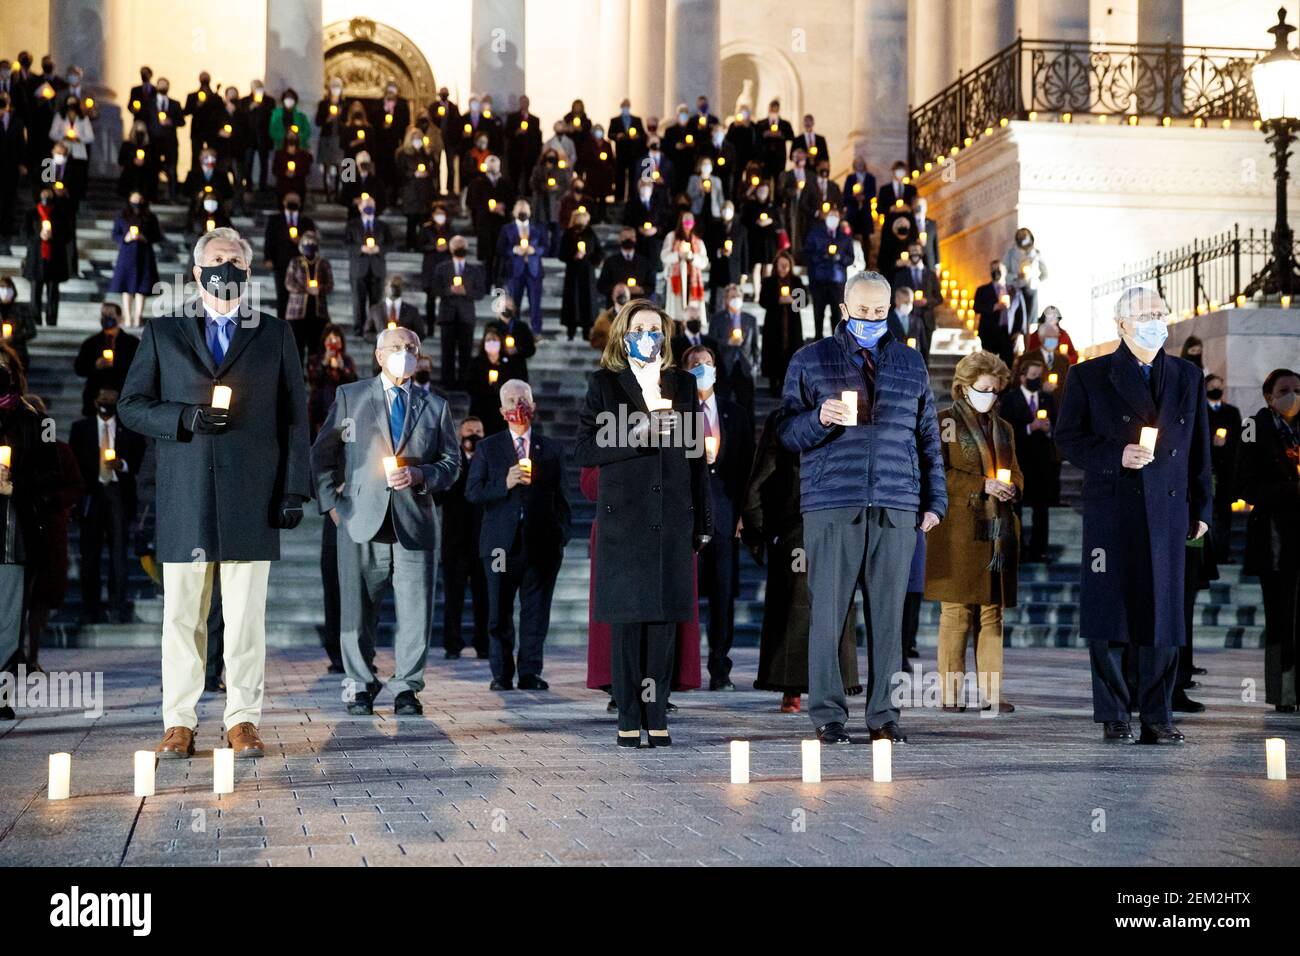 Washington, DC, USA. 23rd Feb, 2021. A bipartisan group of members of U.S. Congress participate in a moment of silence for the 500,000 American lives lost to COVID-19 on the steps of the Capitol in Washington, DC, the United States on Feb. 23, 2021. Credit: Ting Shen/Xinhua/Alamy Live News Stock Photo